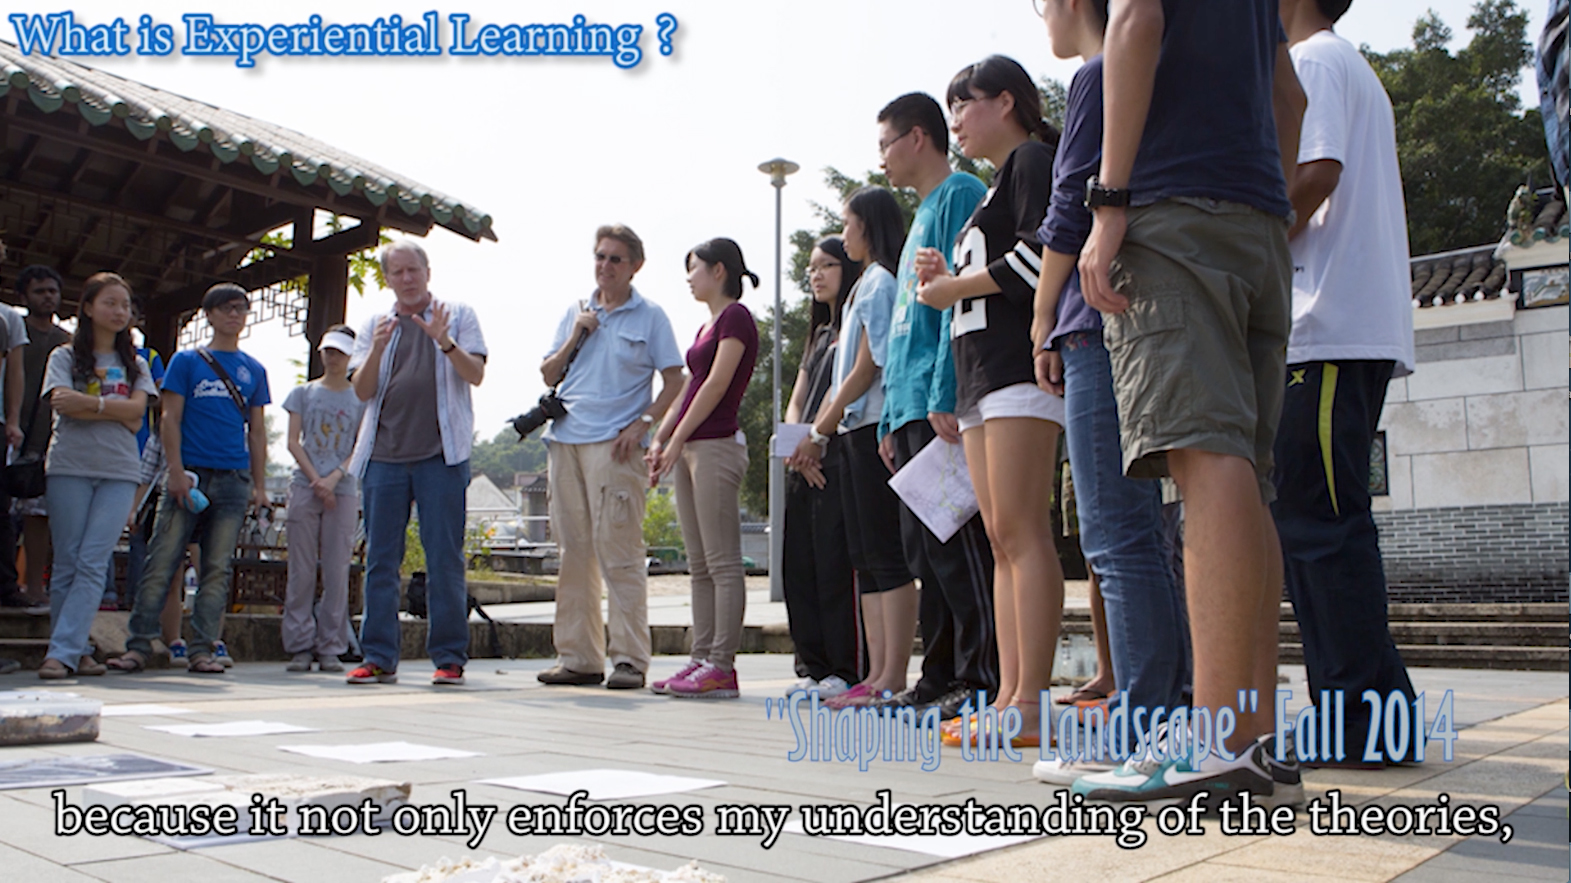 What is Experiential Learning?